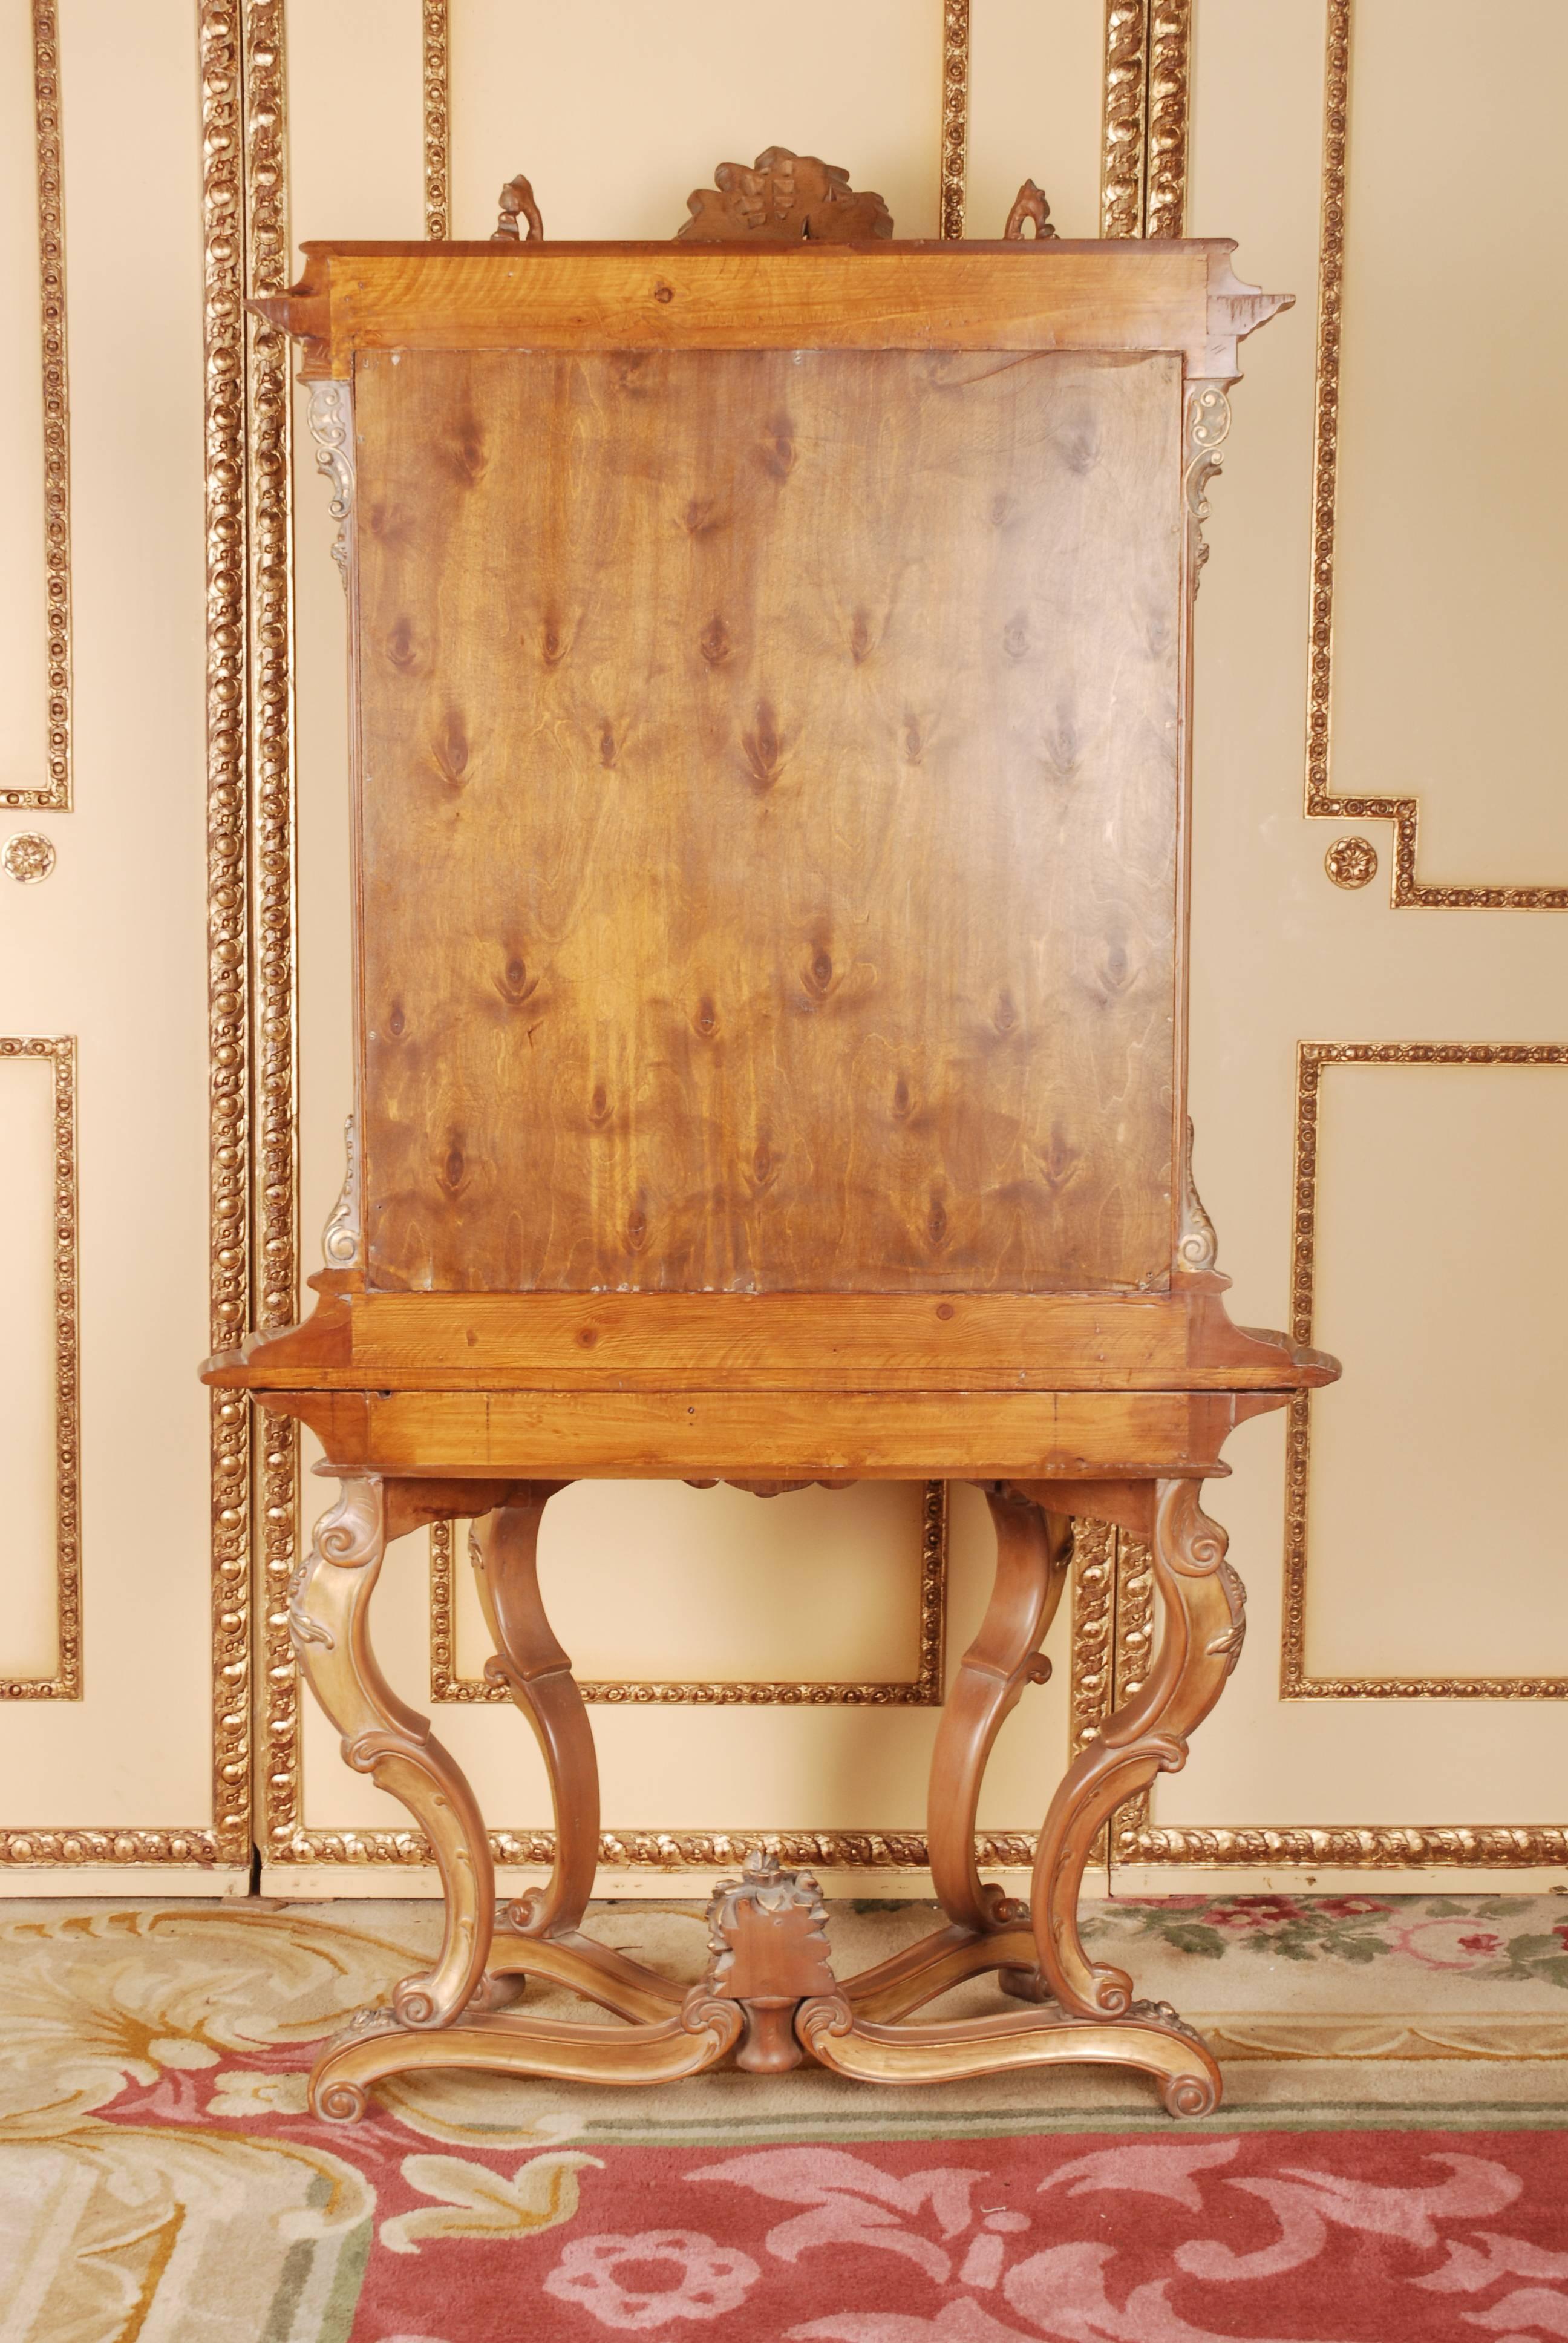 20th Century Splendid Display Cabinet in the Rococo Style 4